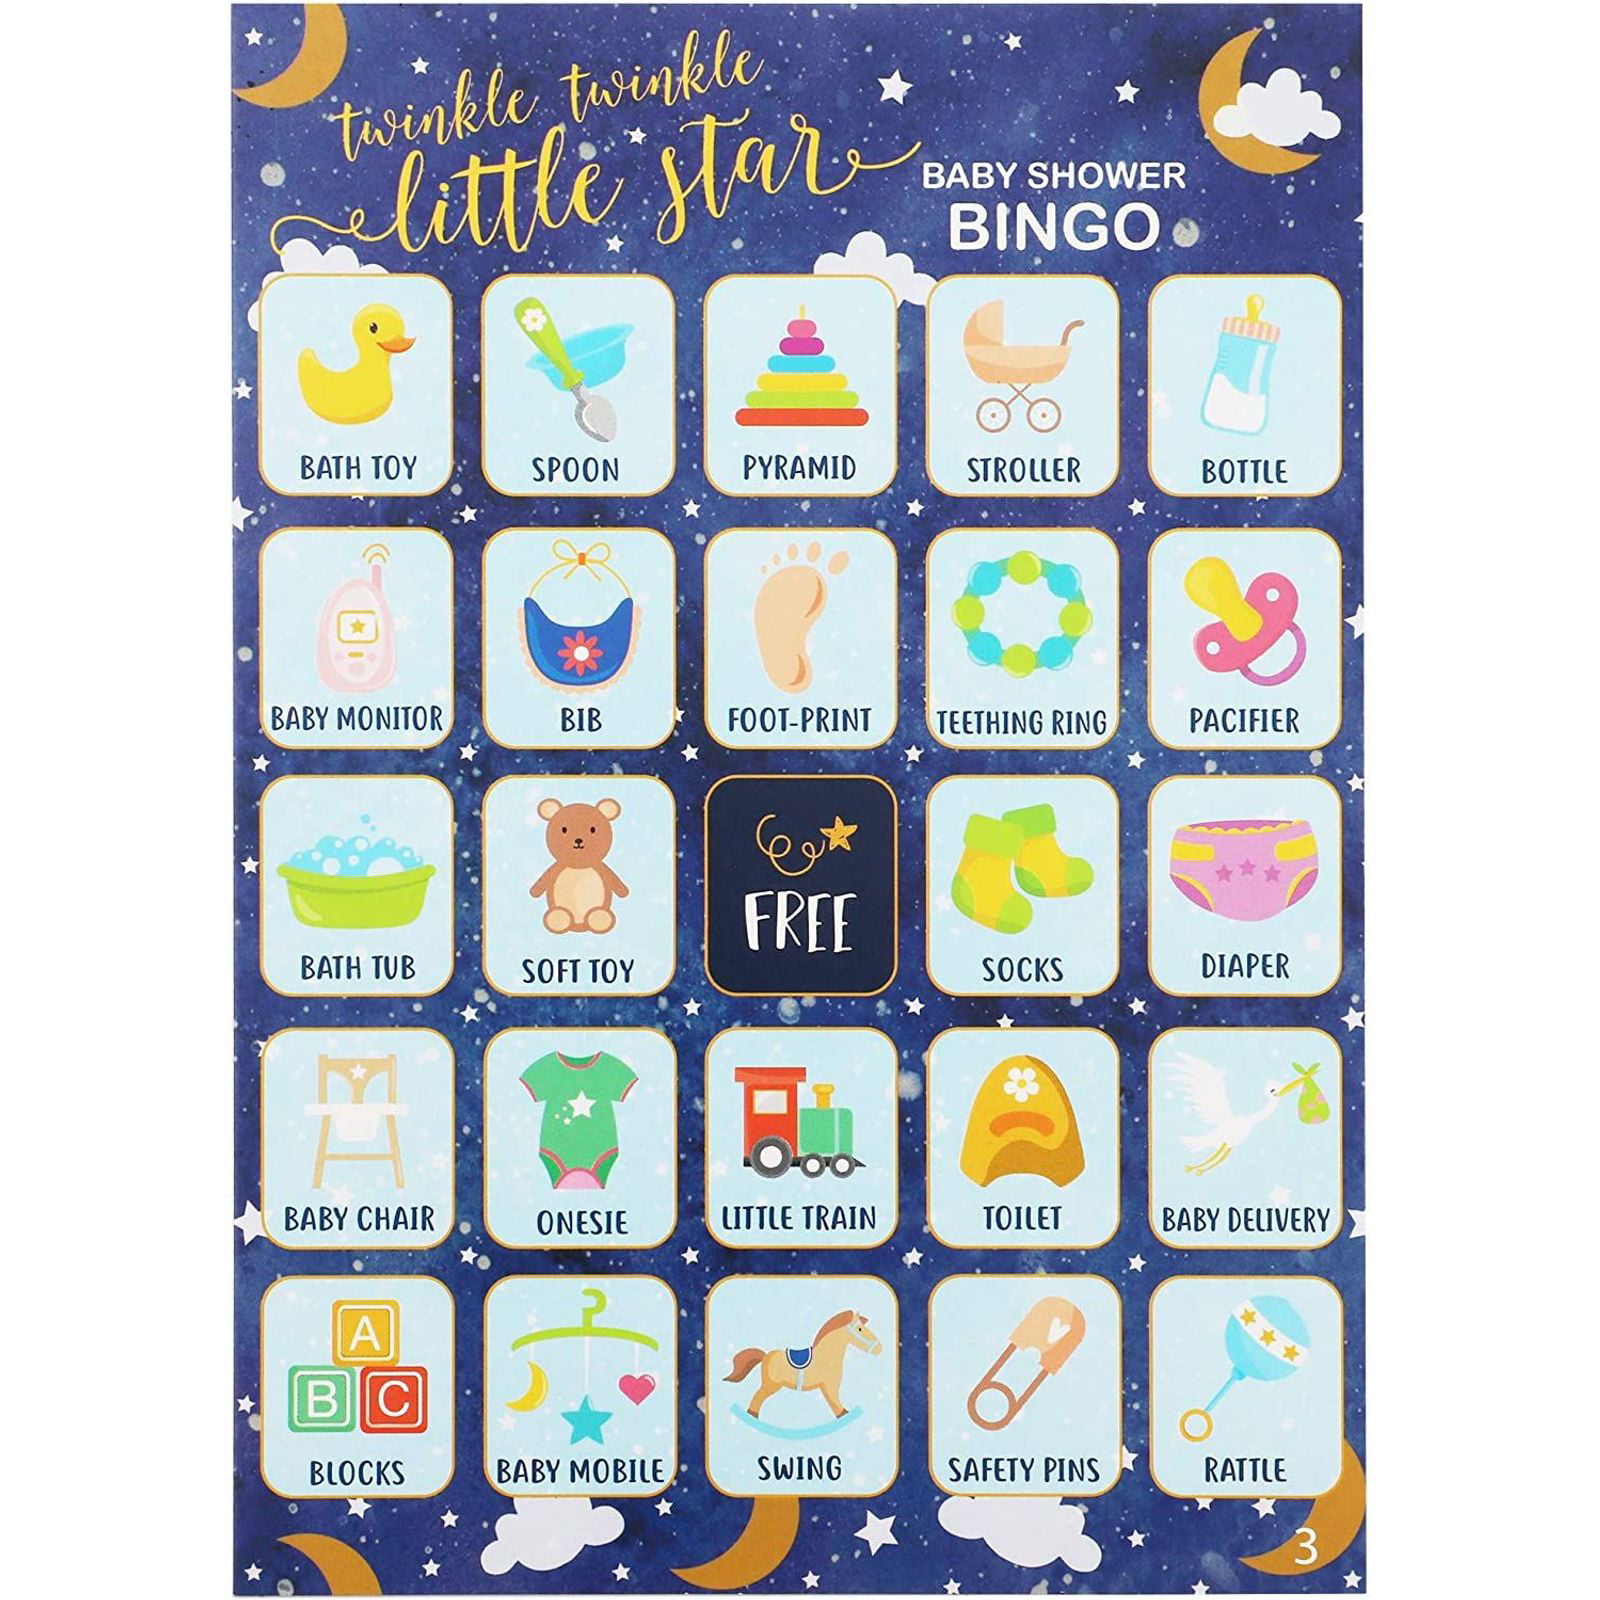 36x Twinkle Little Star Baby Shower Bingo Game with Stickers 5 x 7 Inches 